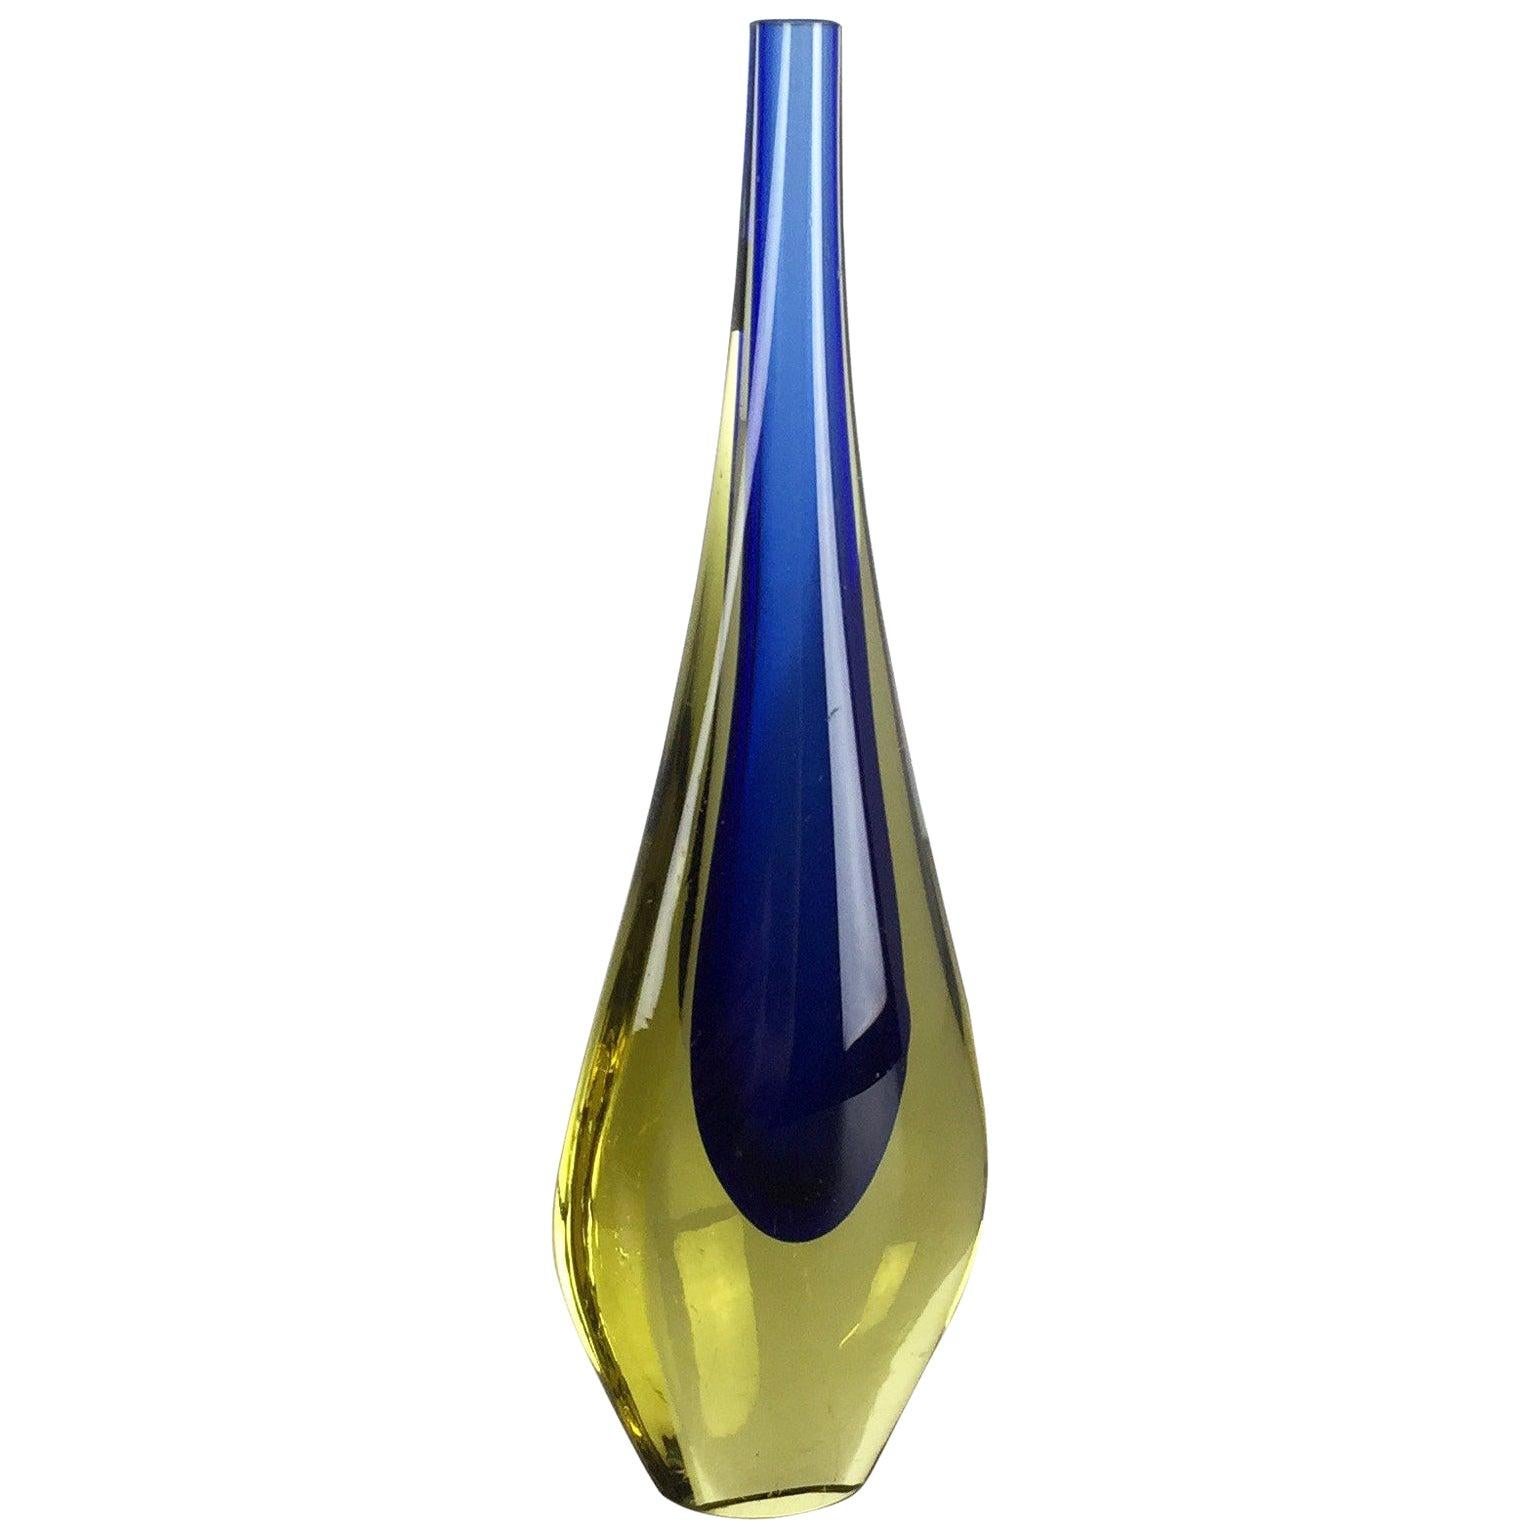 Small 1960s Murano Glass Sommerso Single-Stem Vase by Flavio Poli, Italy For Sale